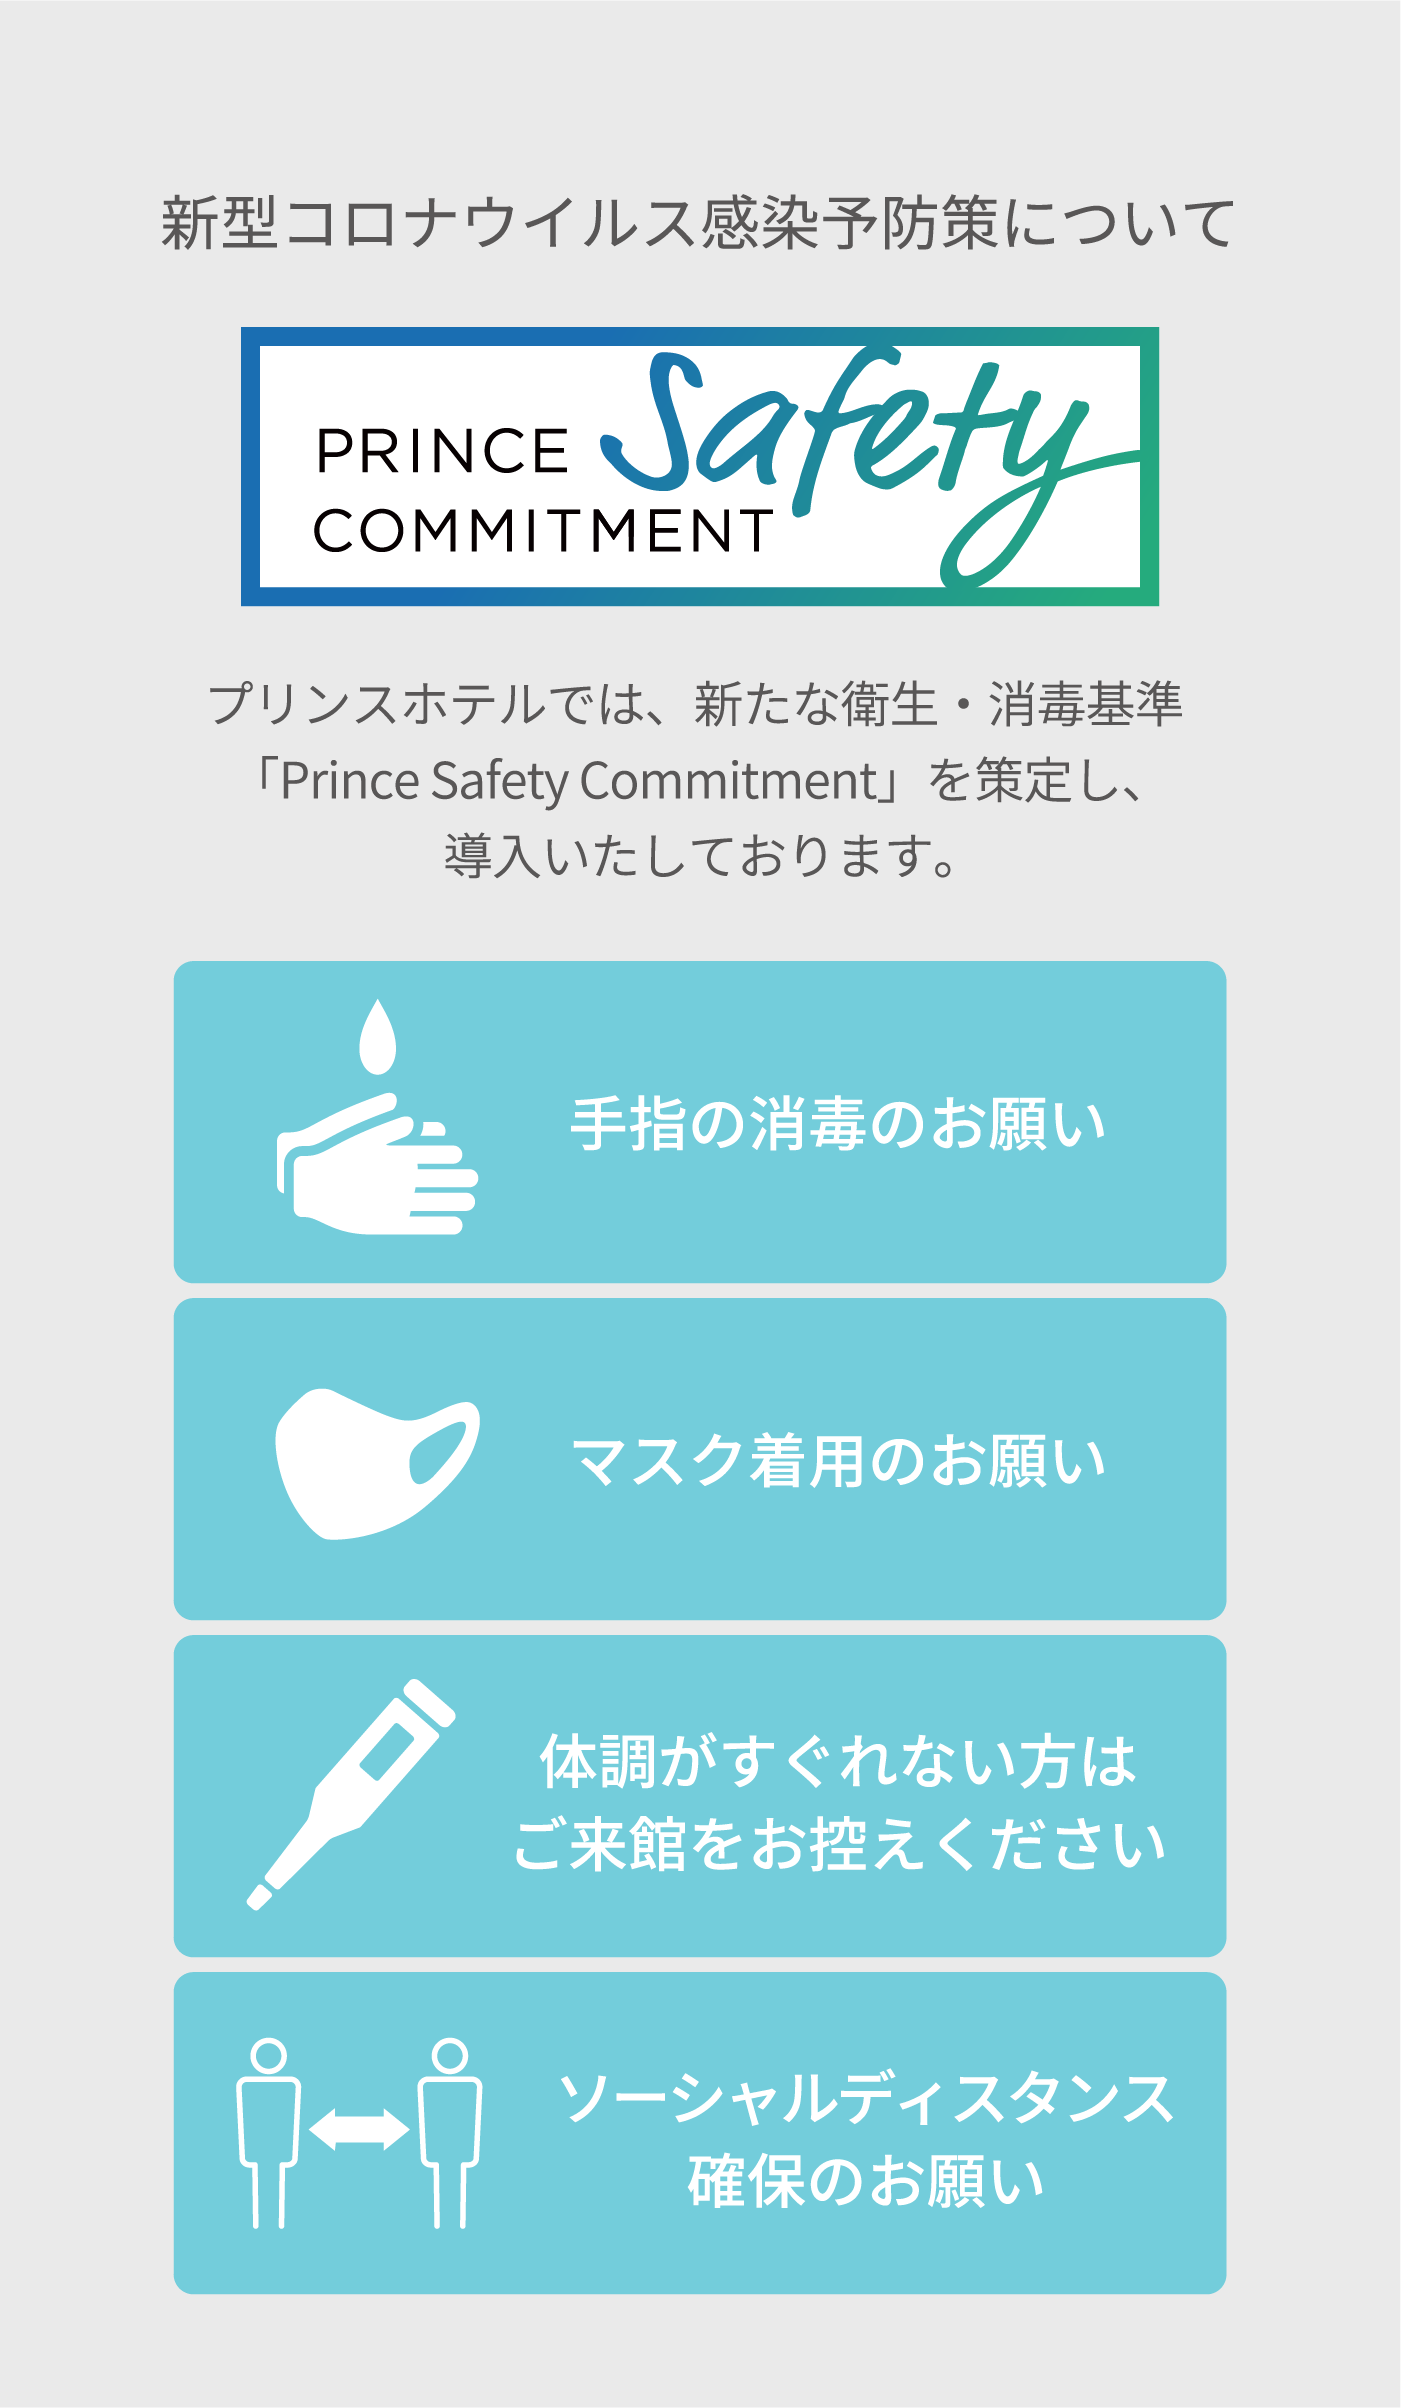 PRINCE Safety COMMITMENT